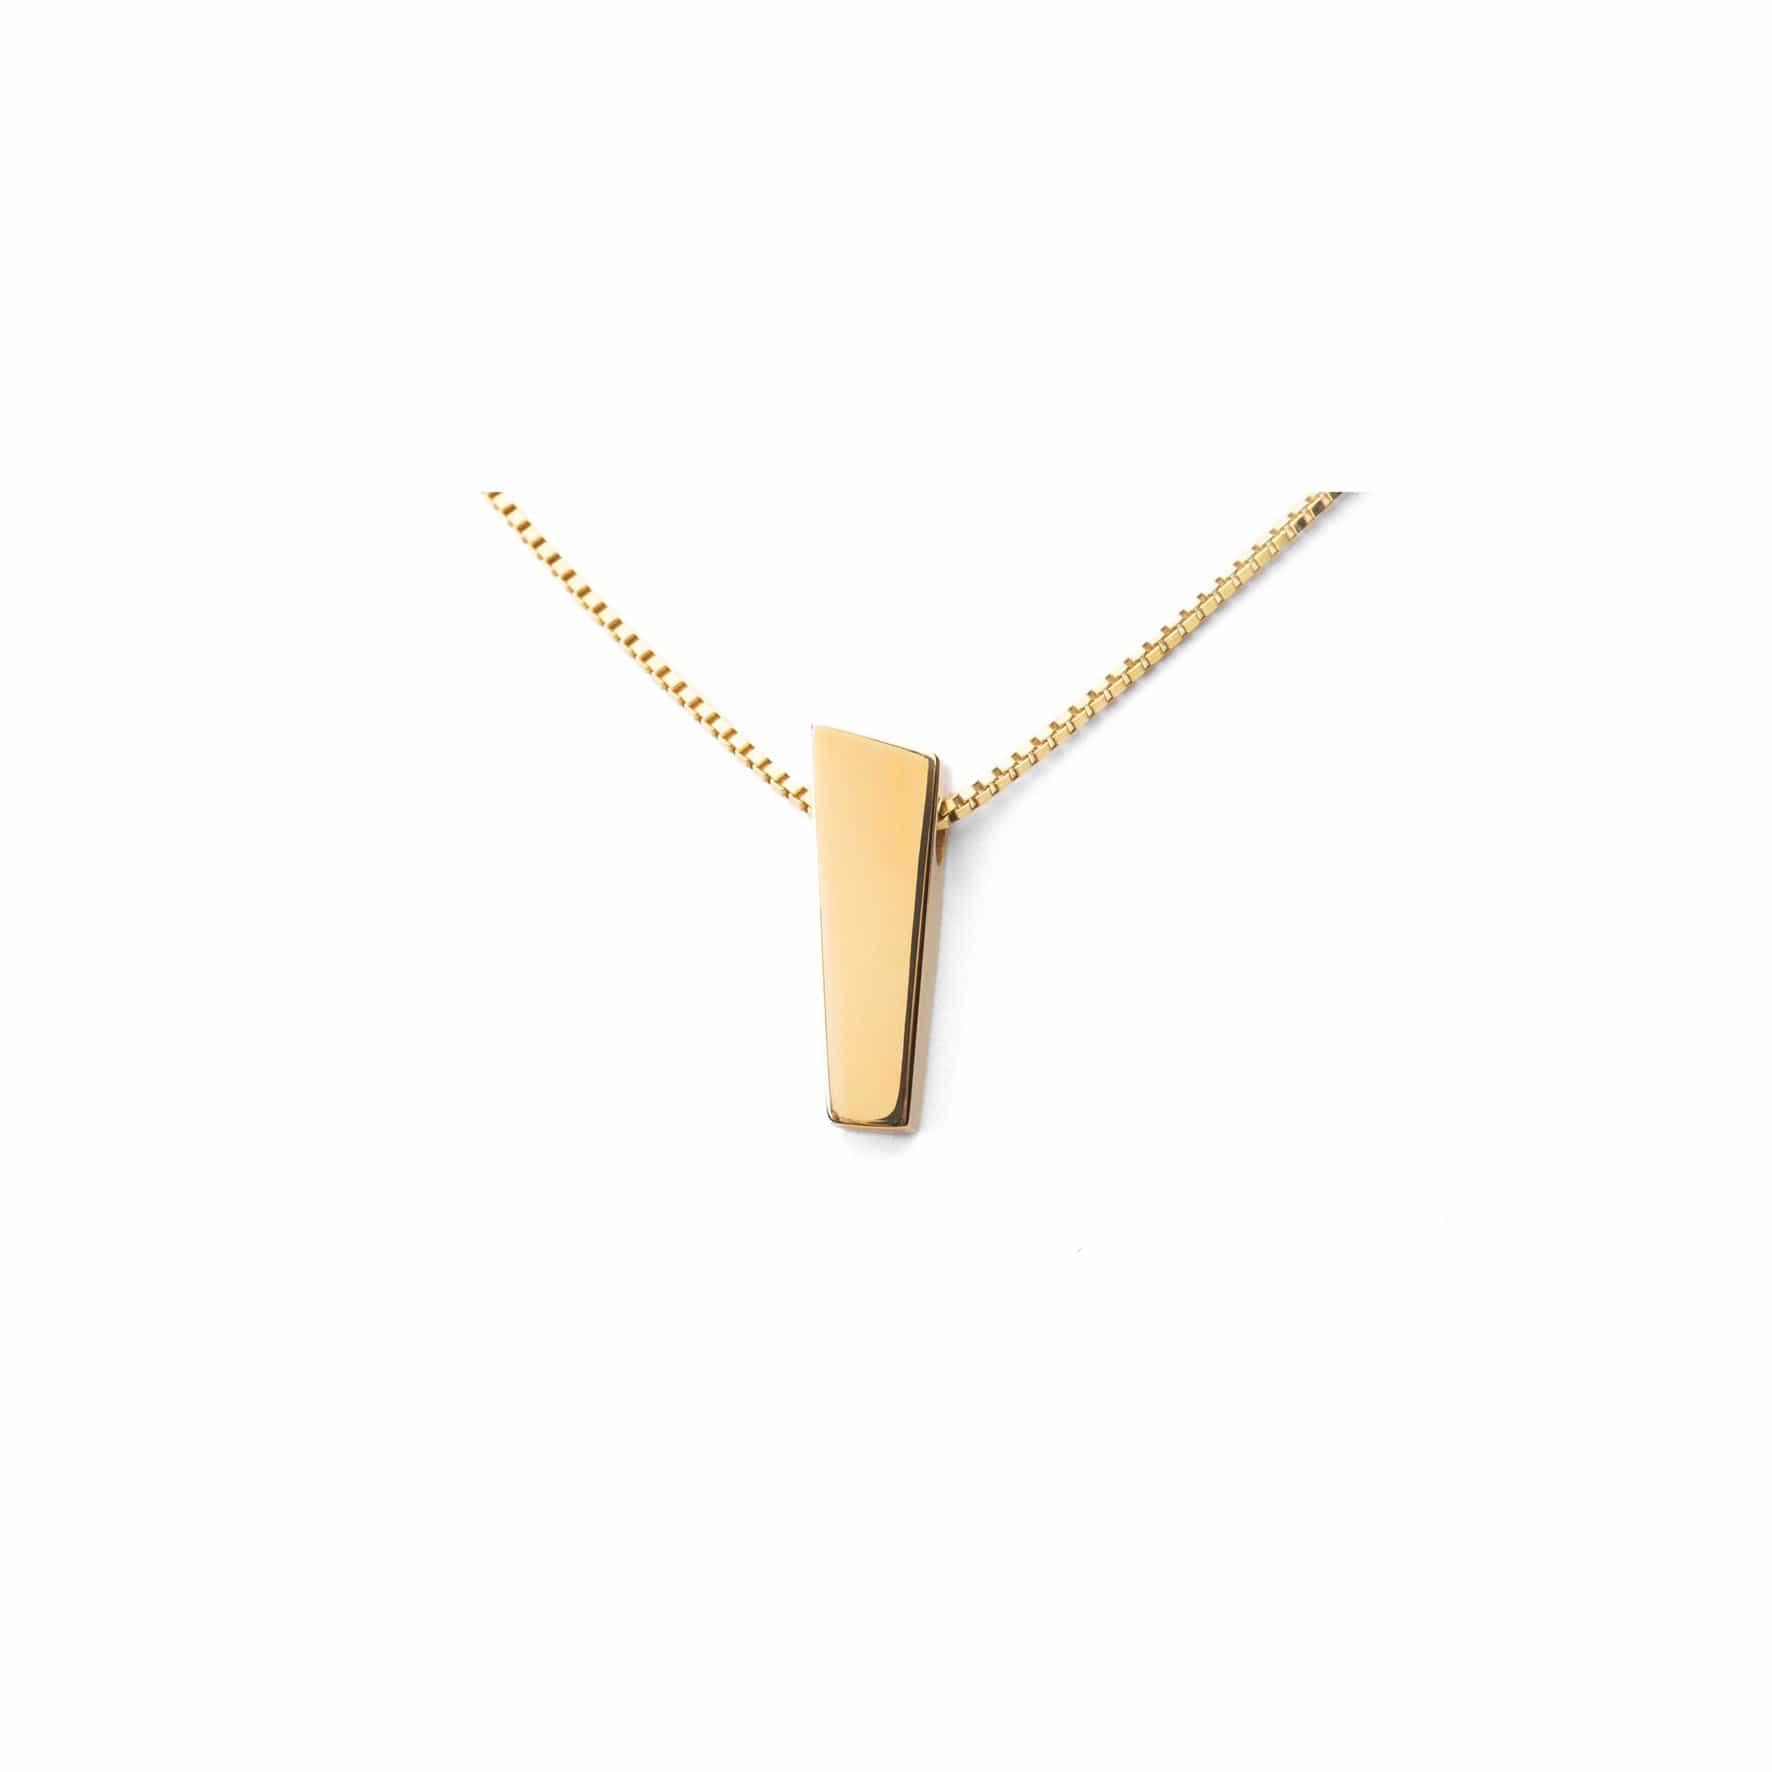 Pendant crafted from 14k gold with a matte surface